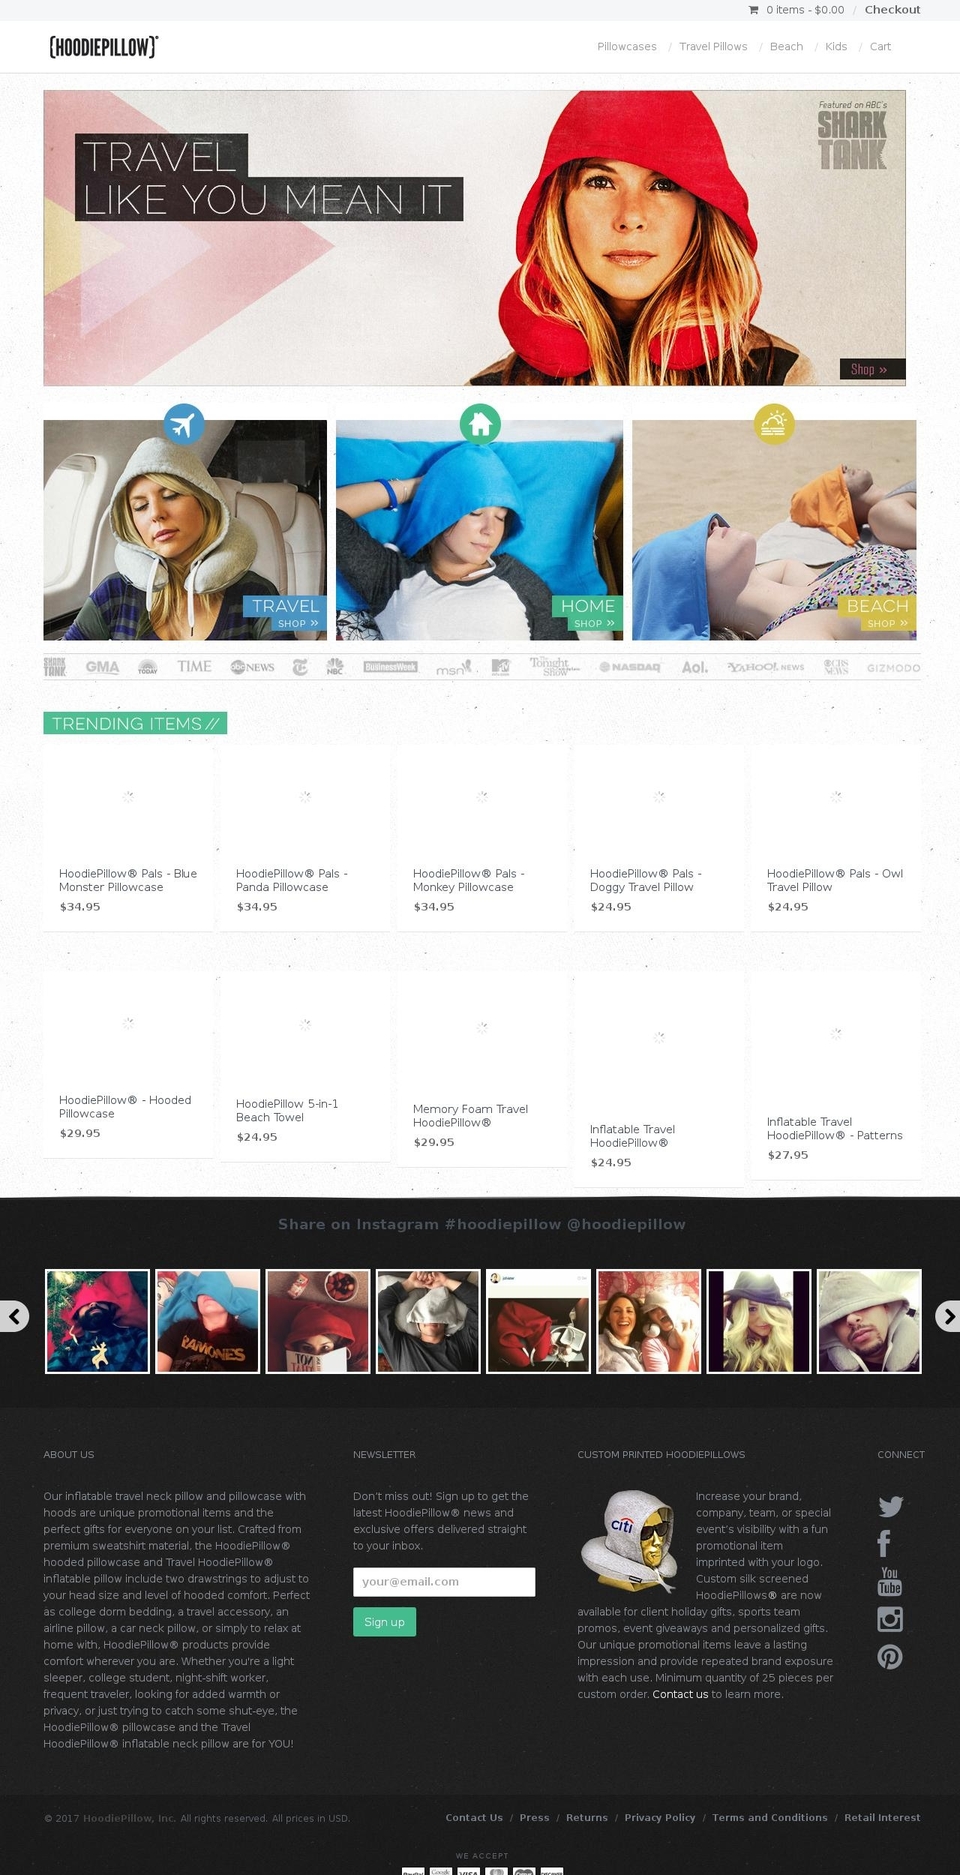 Copy of Providence Shopify theme site example hd-pillows.org